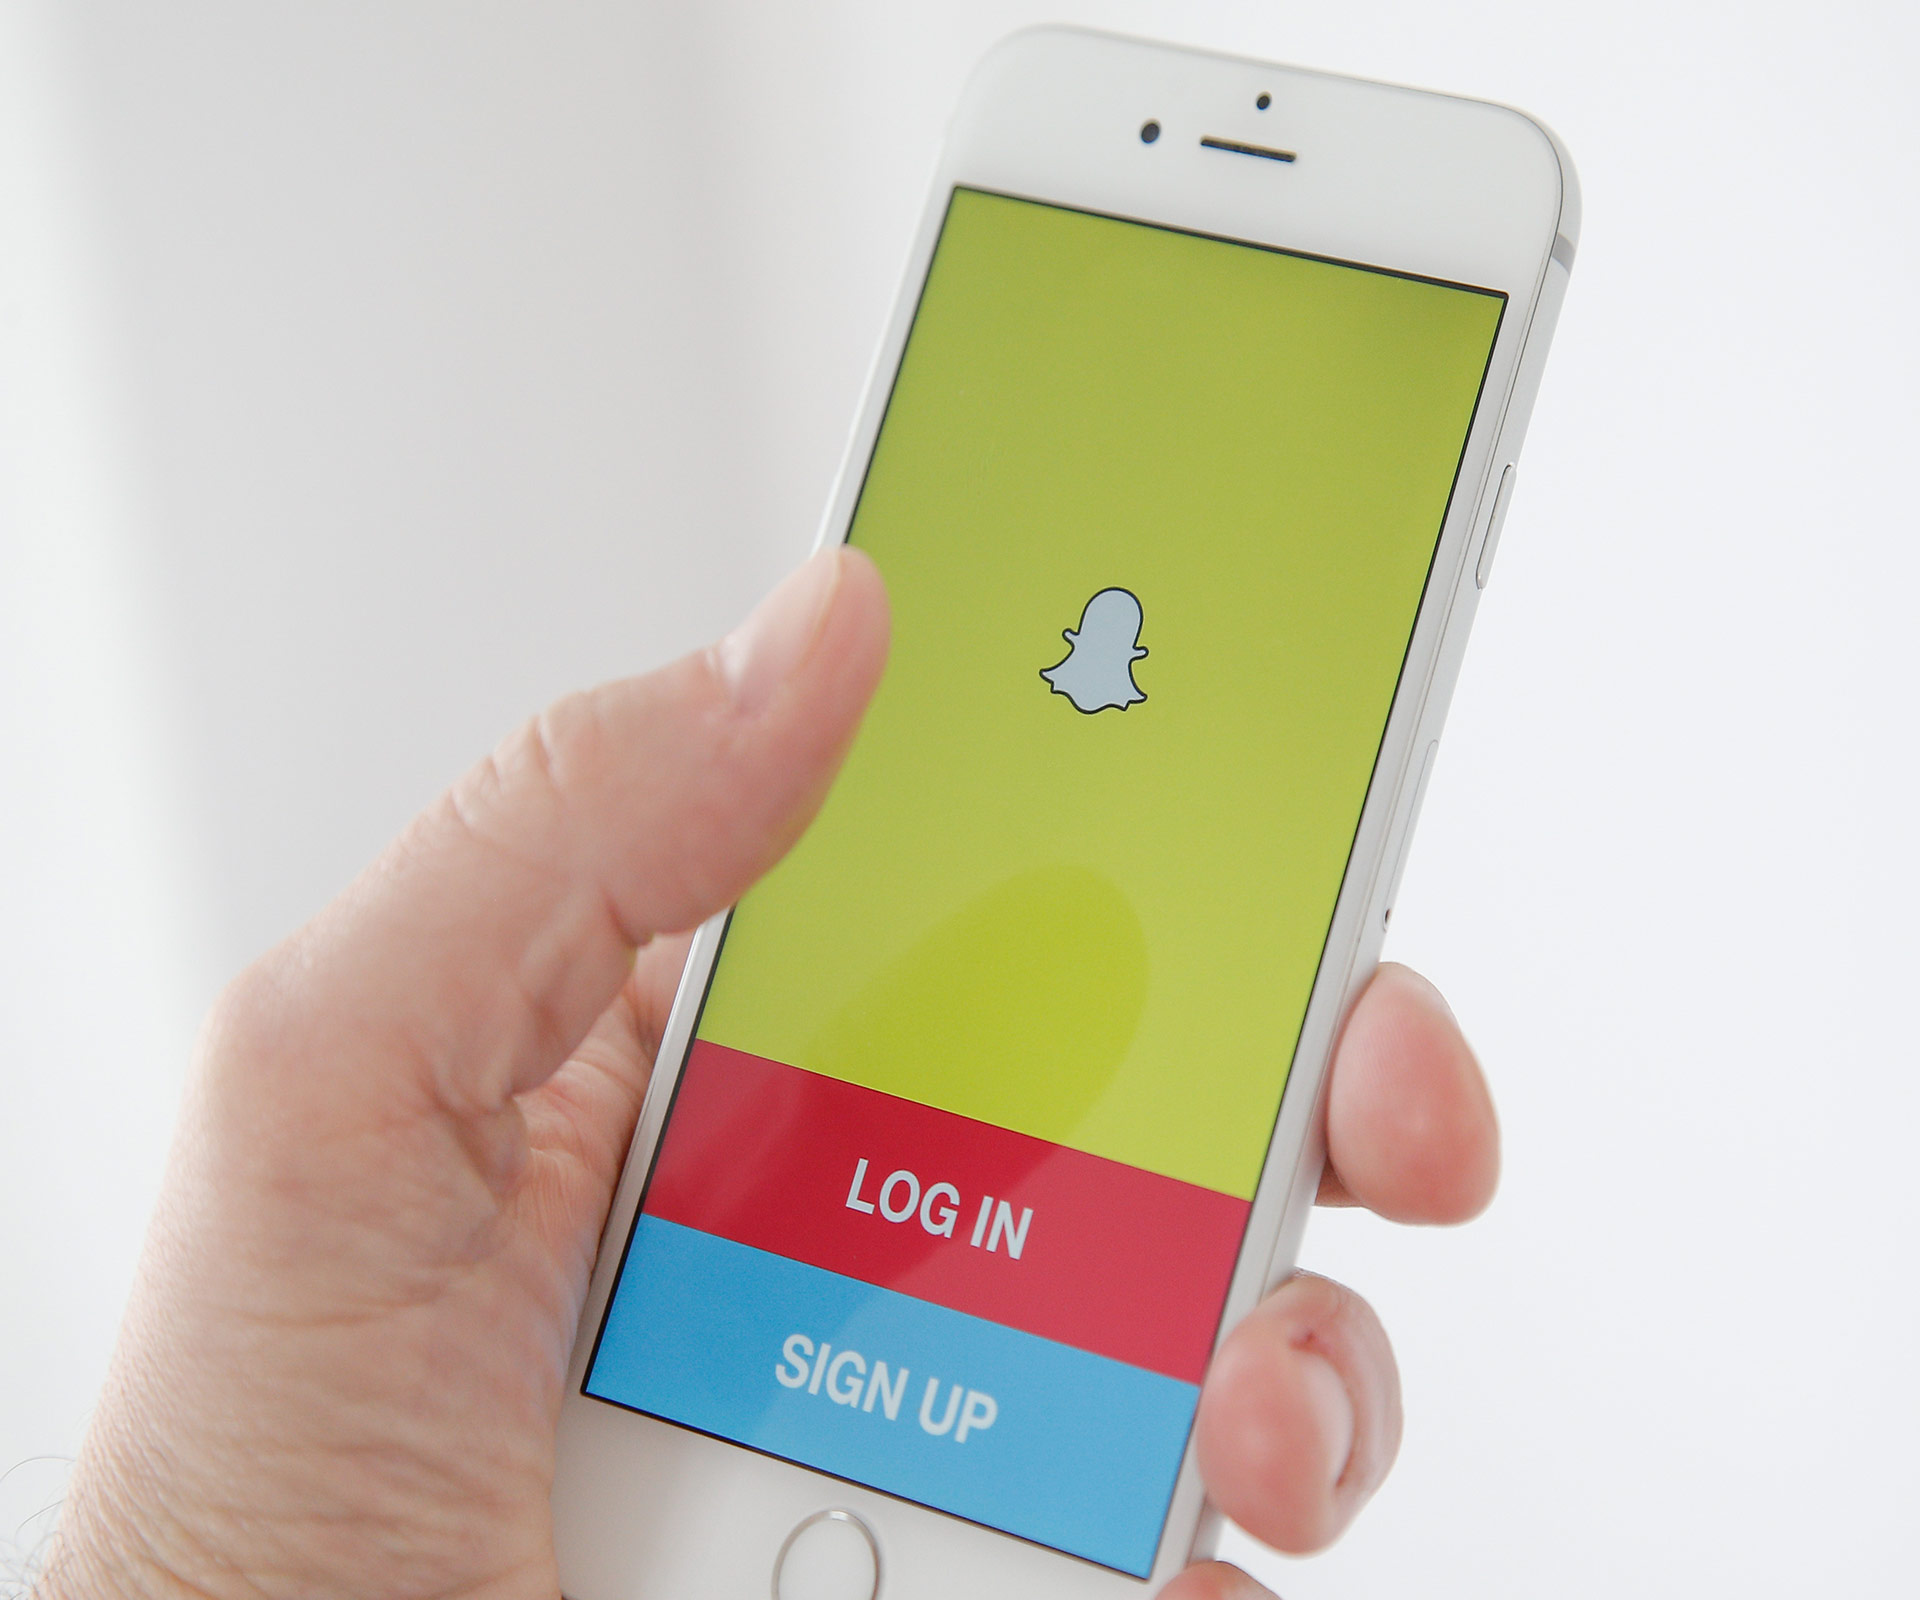 Worried about the new Snapchat tool? Here’s how you switch it off